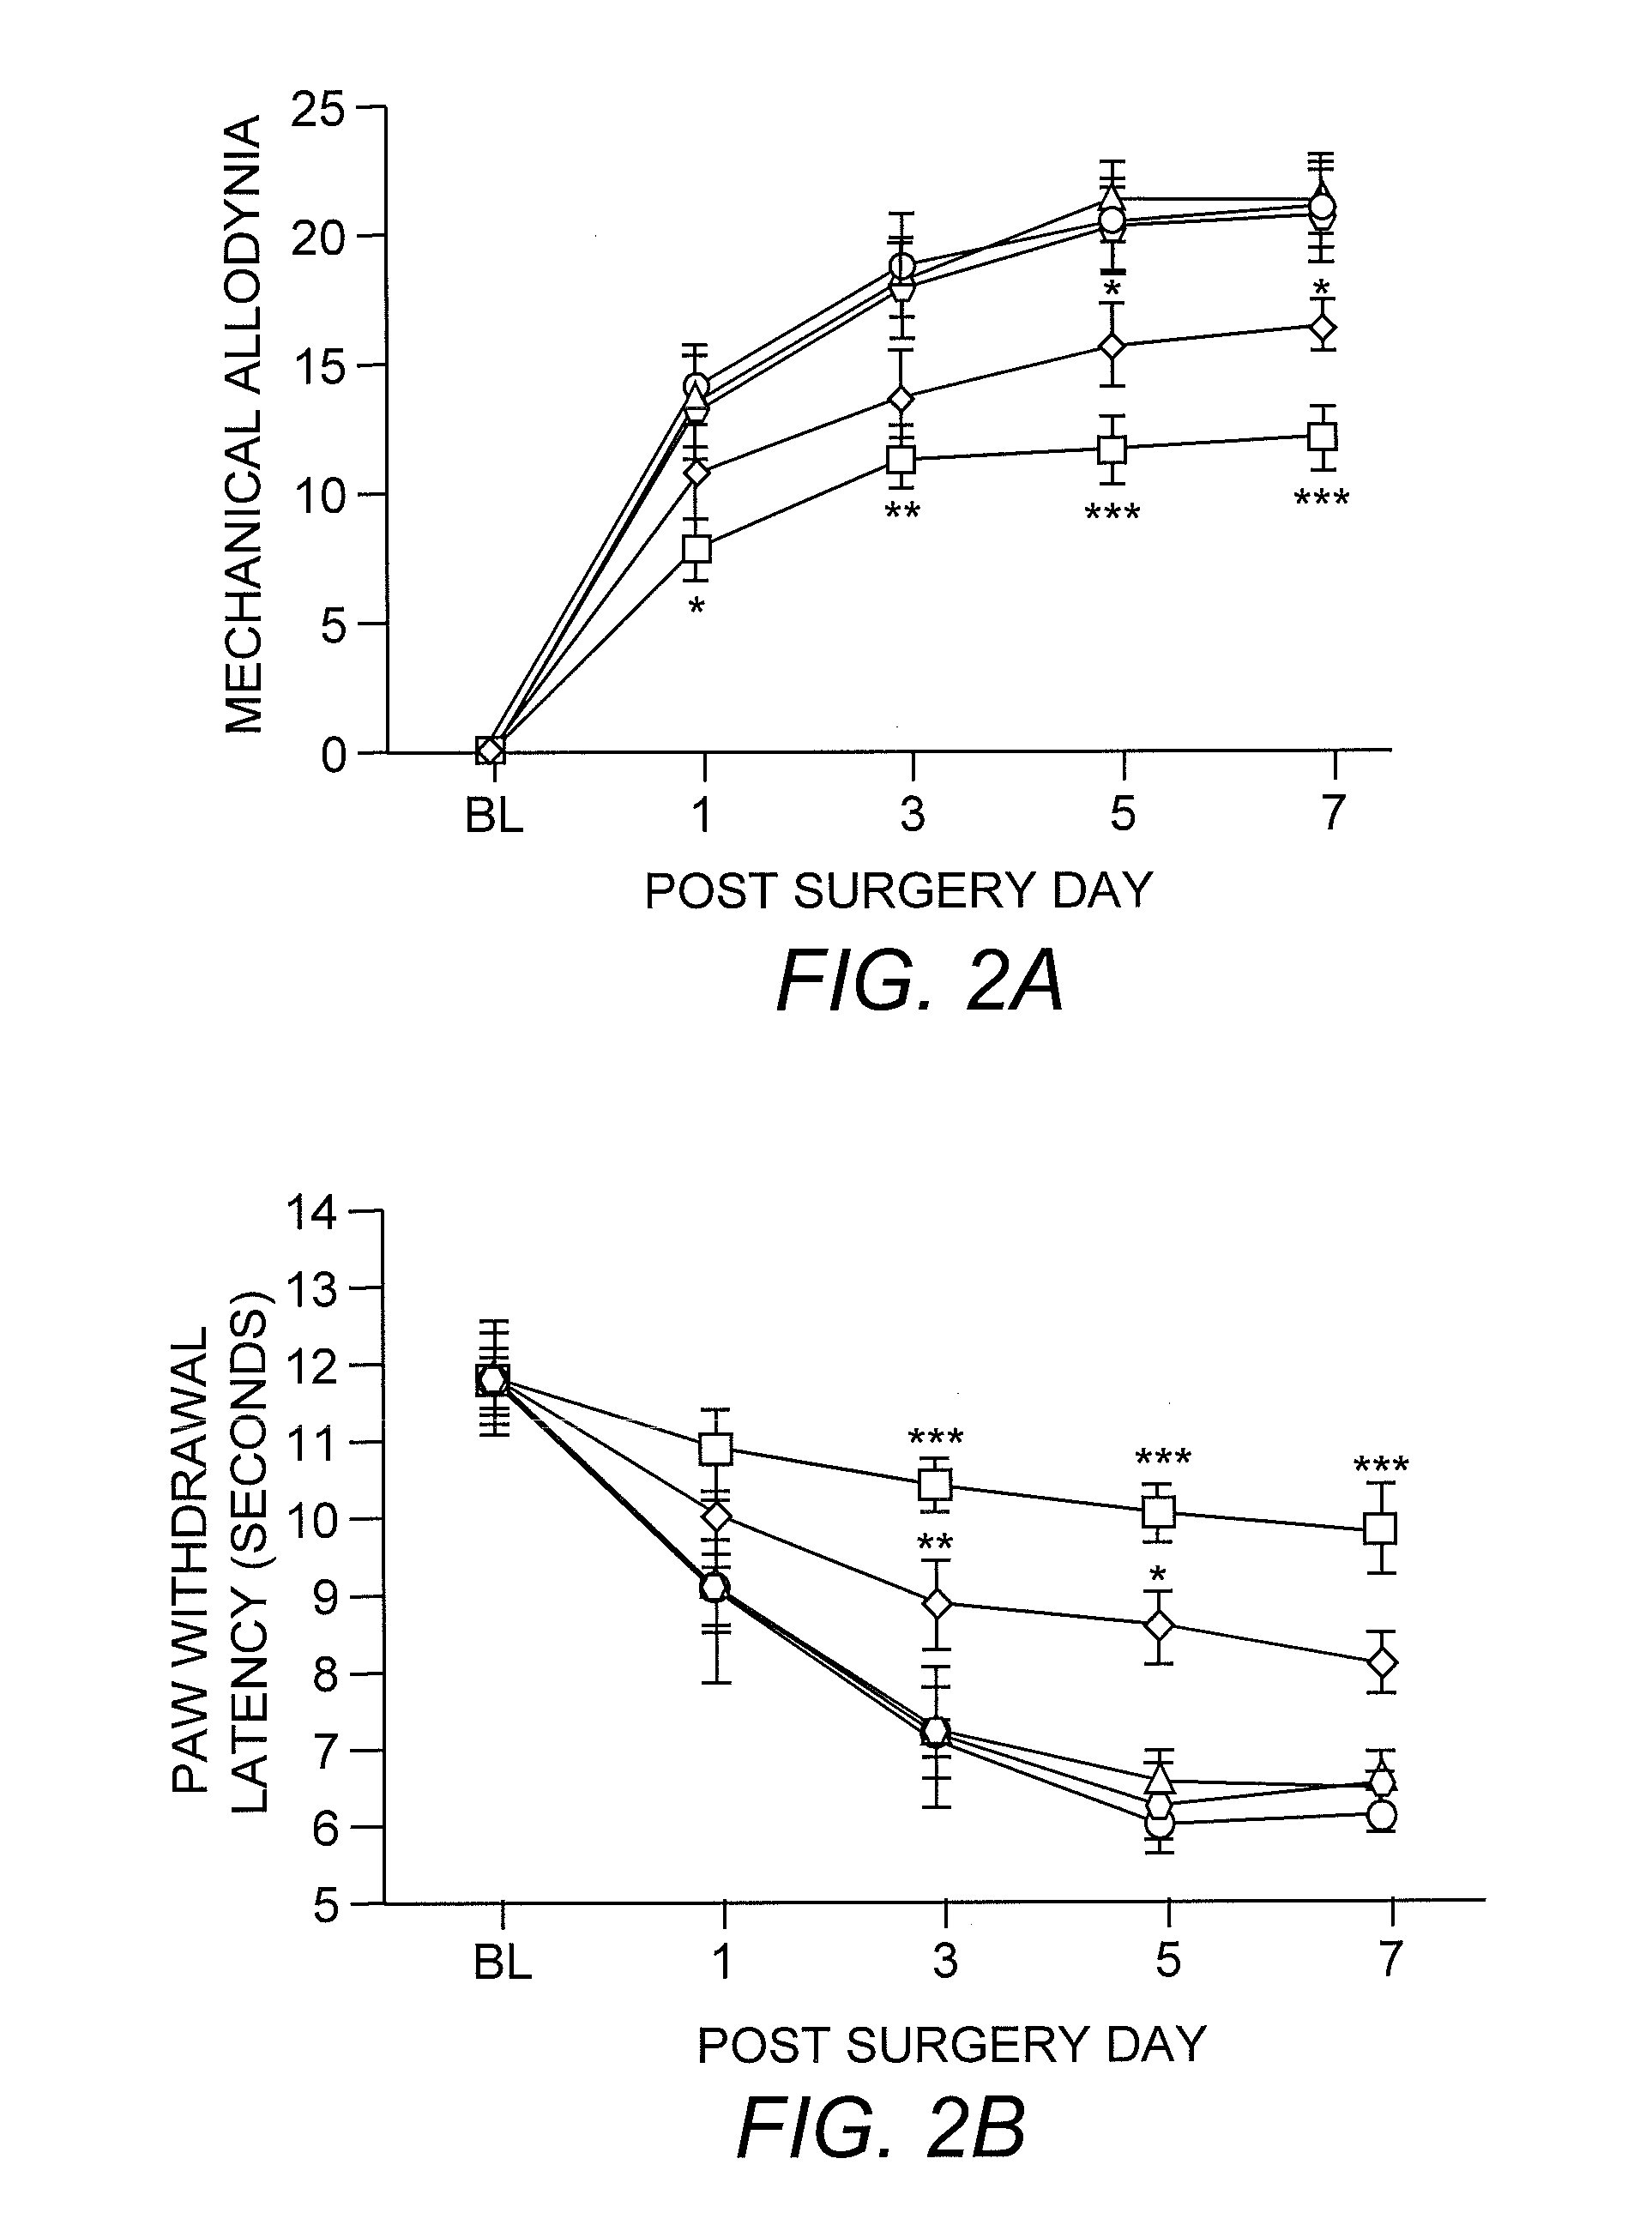 Method for preventing or treating neuropathic pain